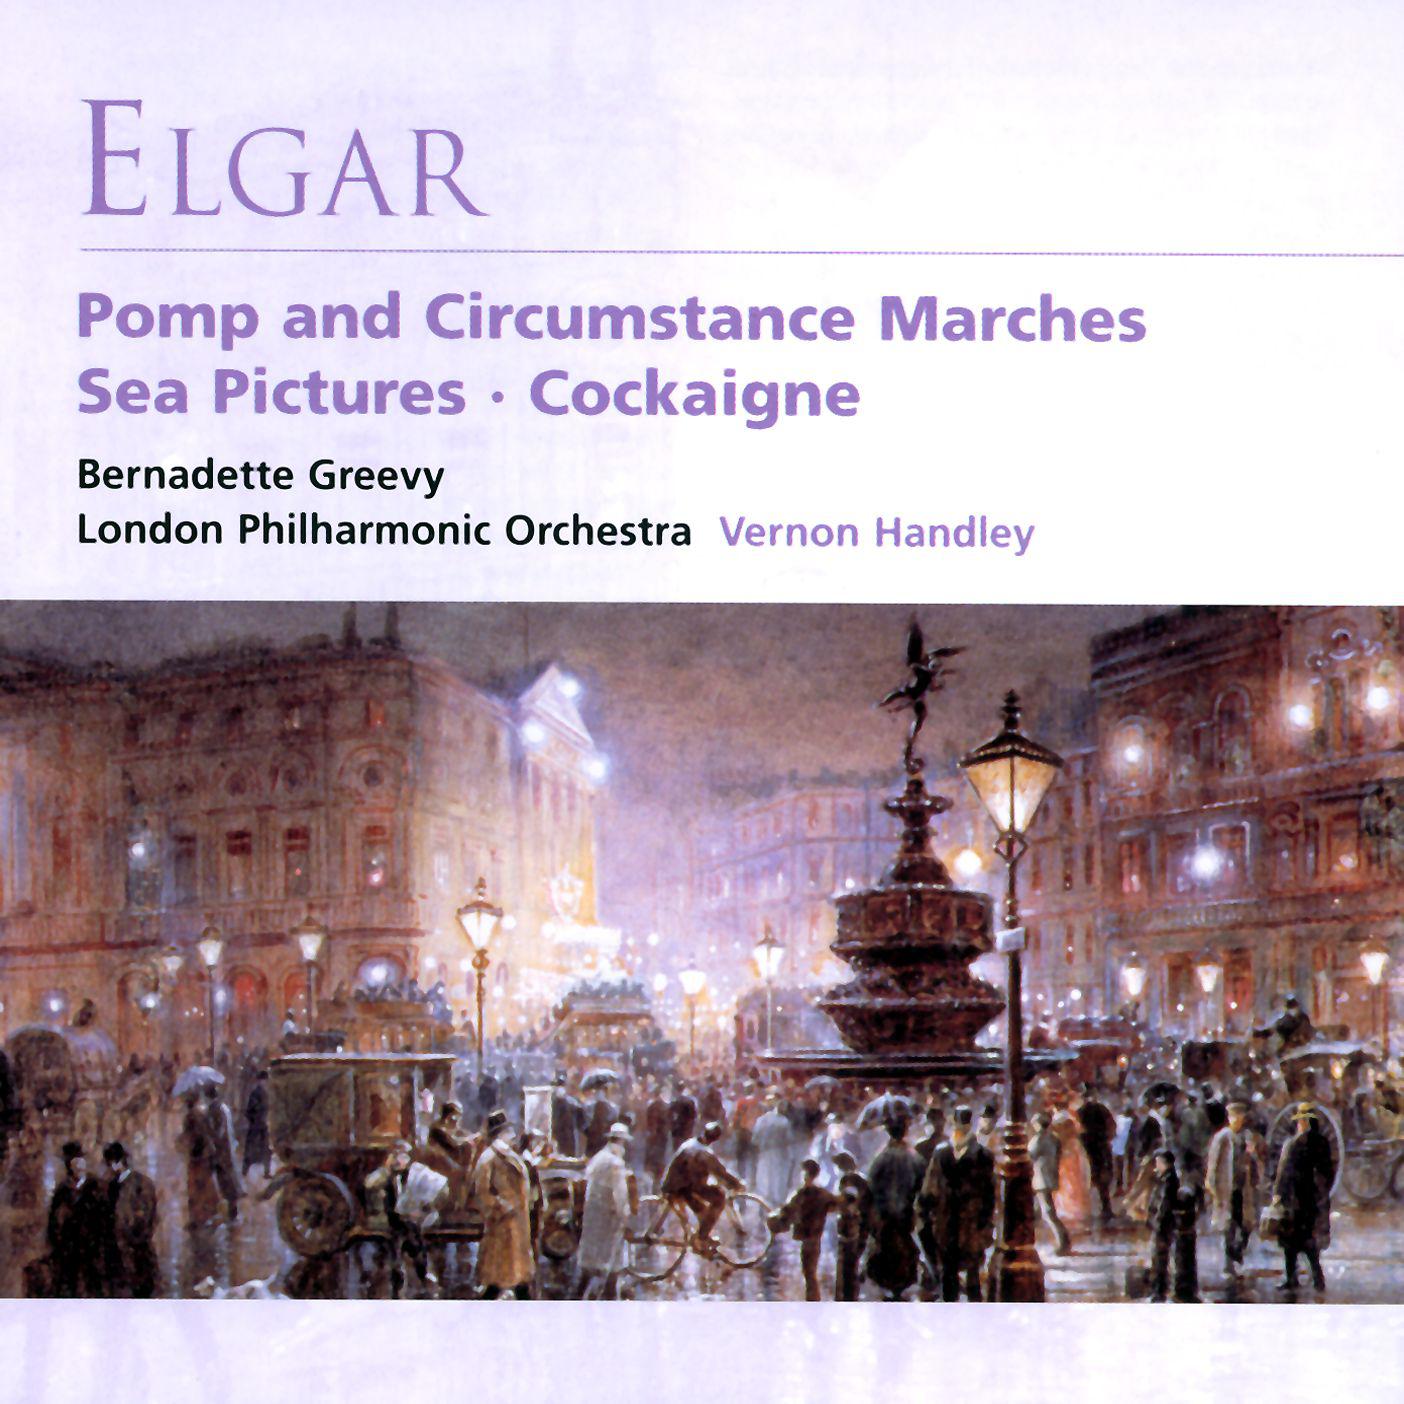 Pomp and Circumstance - Military Marches, Op.39: No. 4 in G